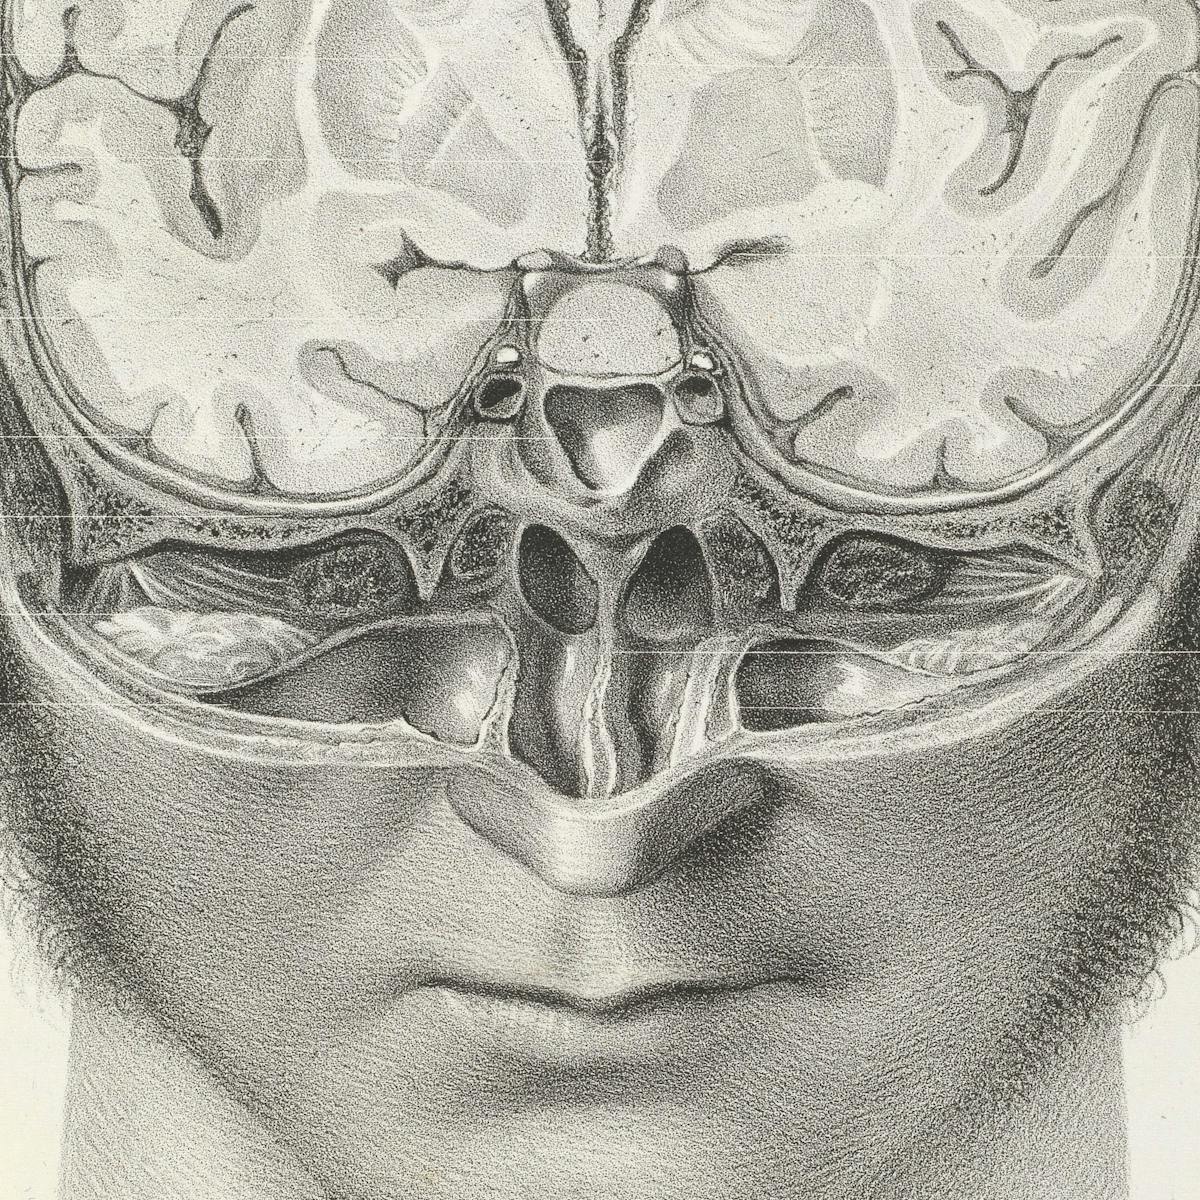 Black and white image showing a man’s head with part of it cut away to reveal the brain inside.